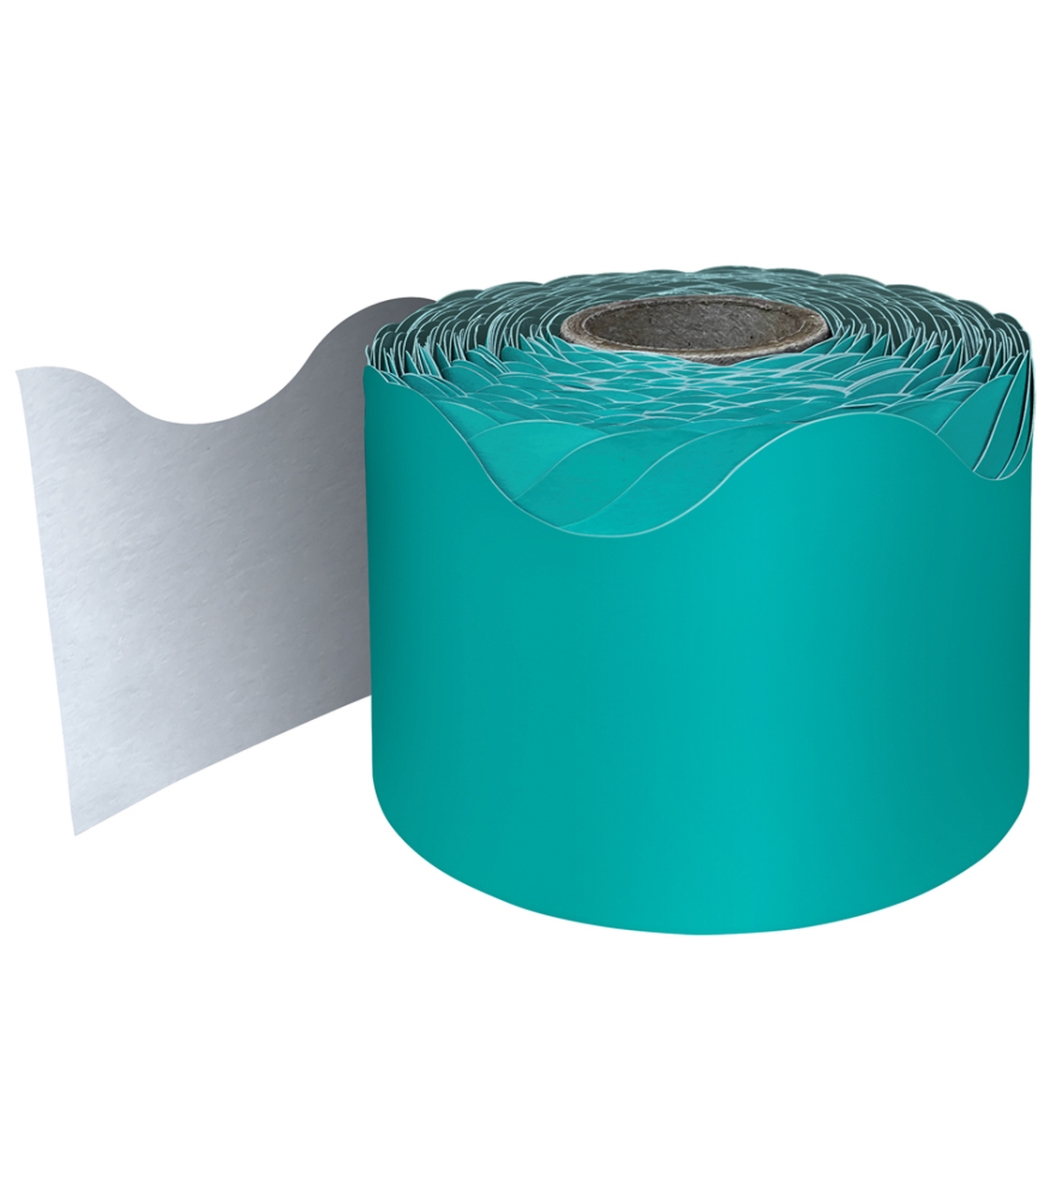 Picture of Carson Dellosa Education CD-108471-3 Rolled Scalloped Borders, Teal - 3 Roll